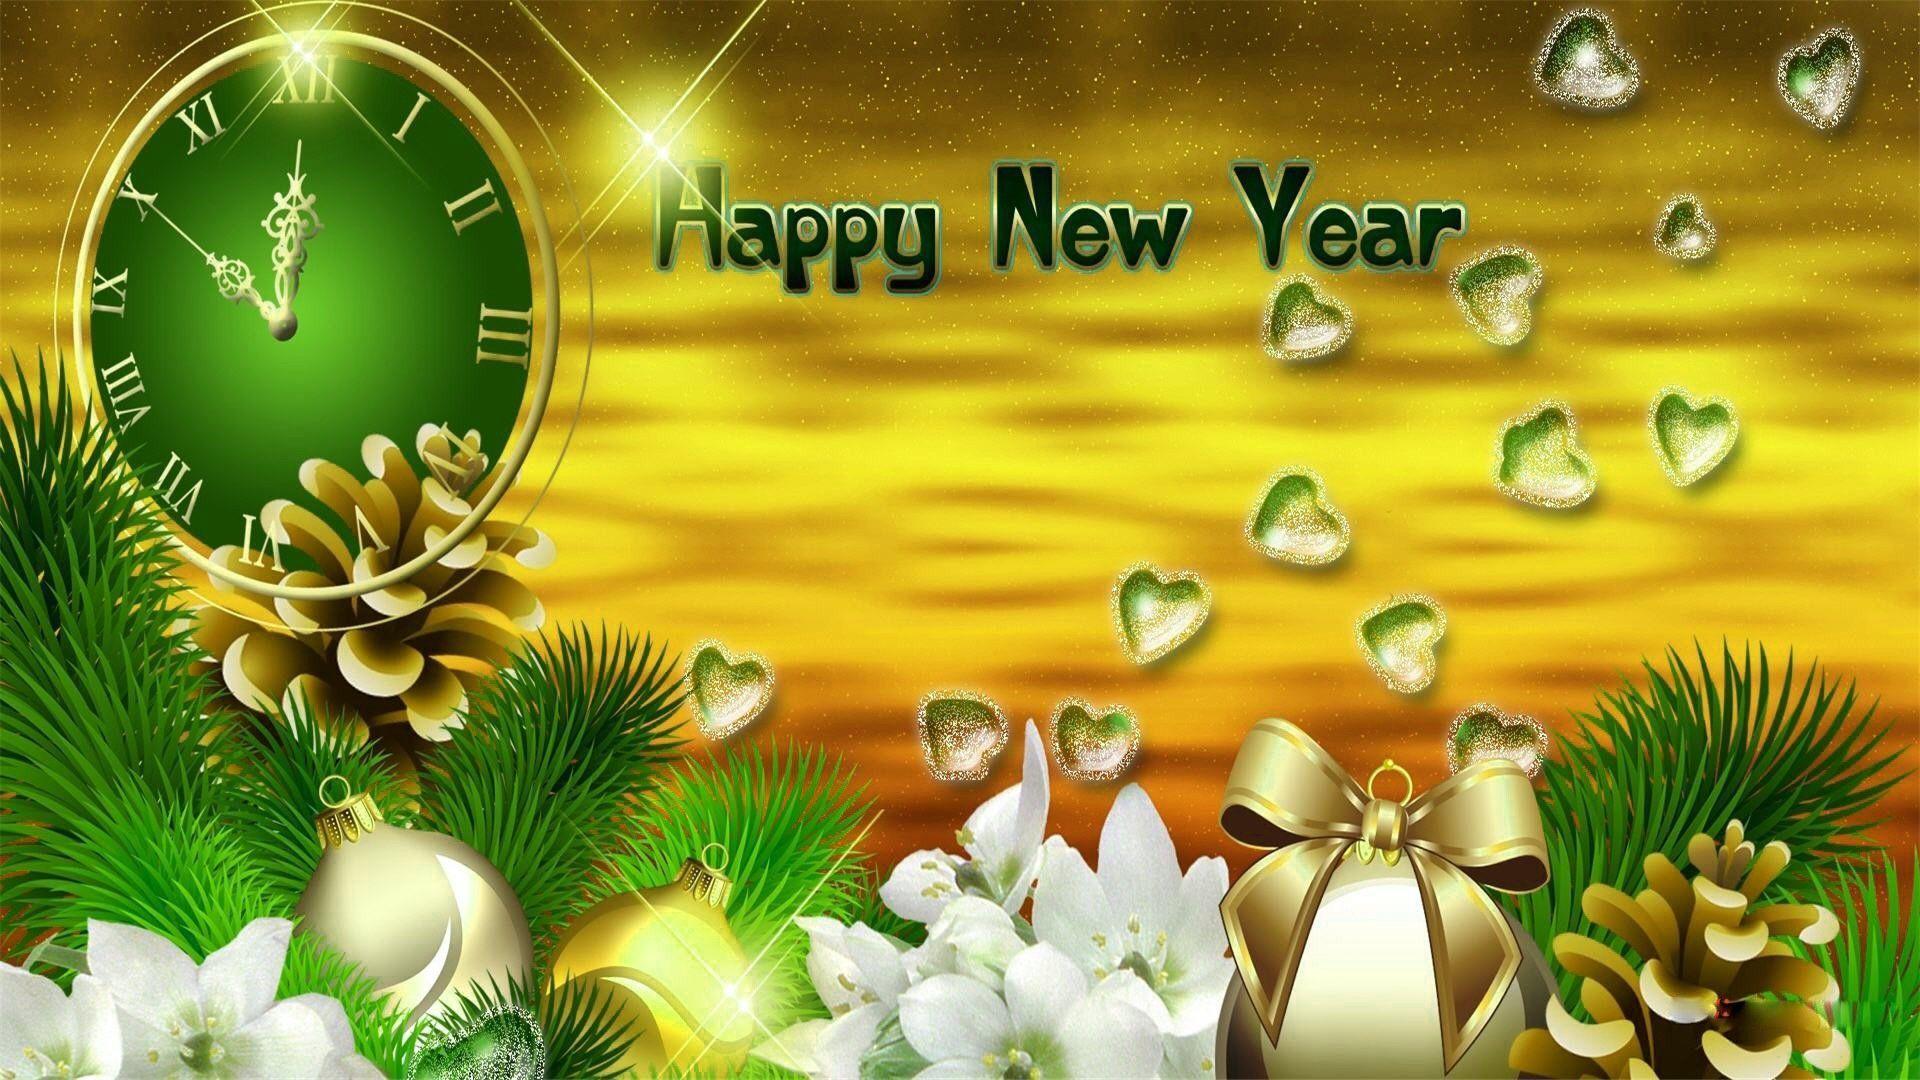 Happy new year wallpapers HD desktop background free ...